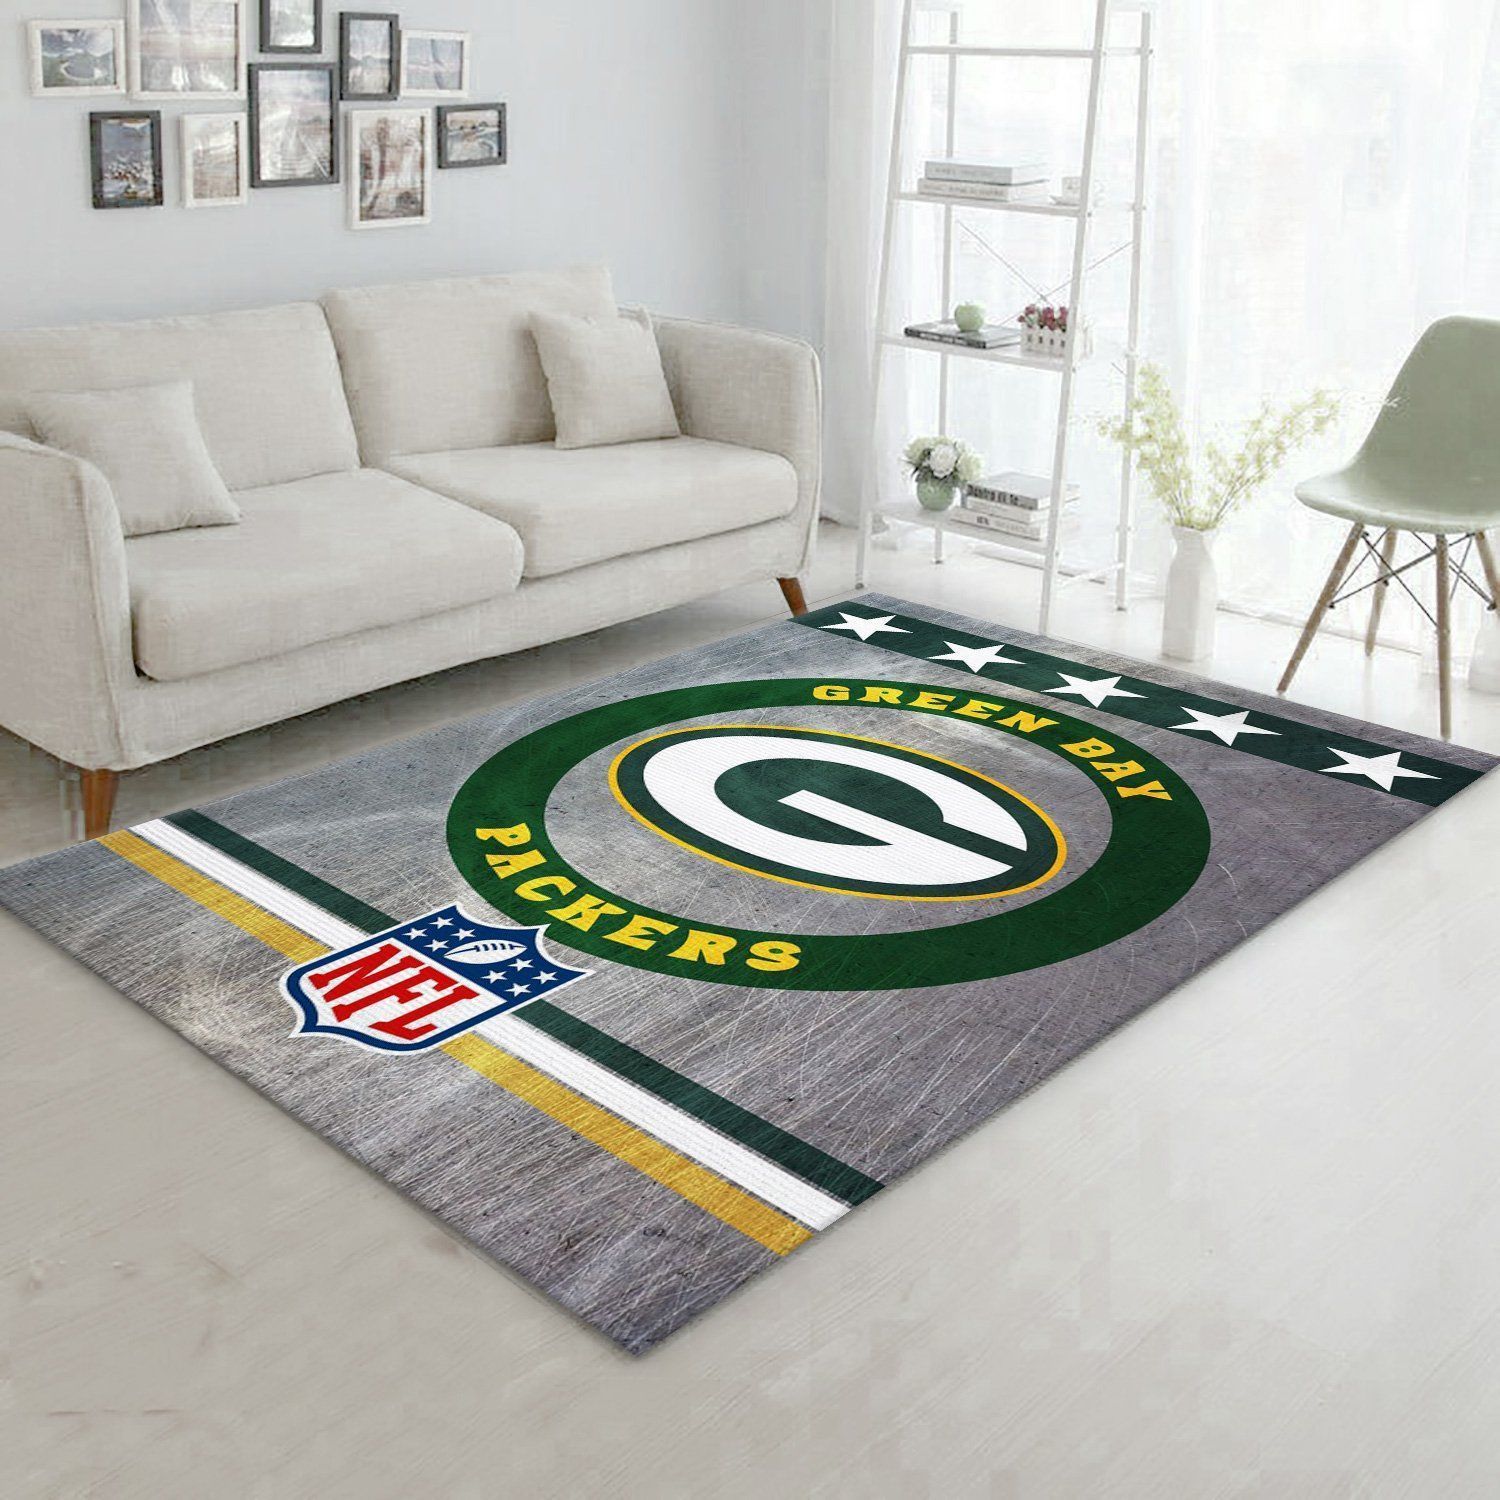 Green Bay Packers Nfl Football Team Area Rug For Gift Bedroom Rug Home US Decor - Indoor Outdoor Rugs